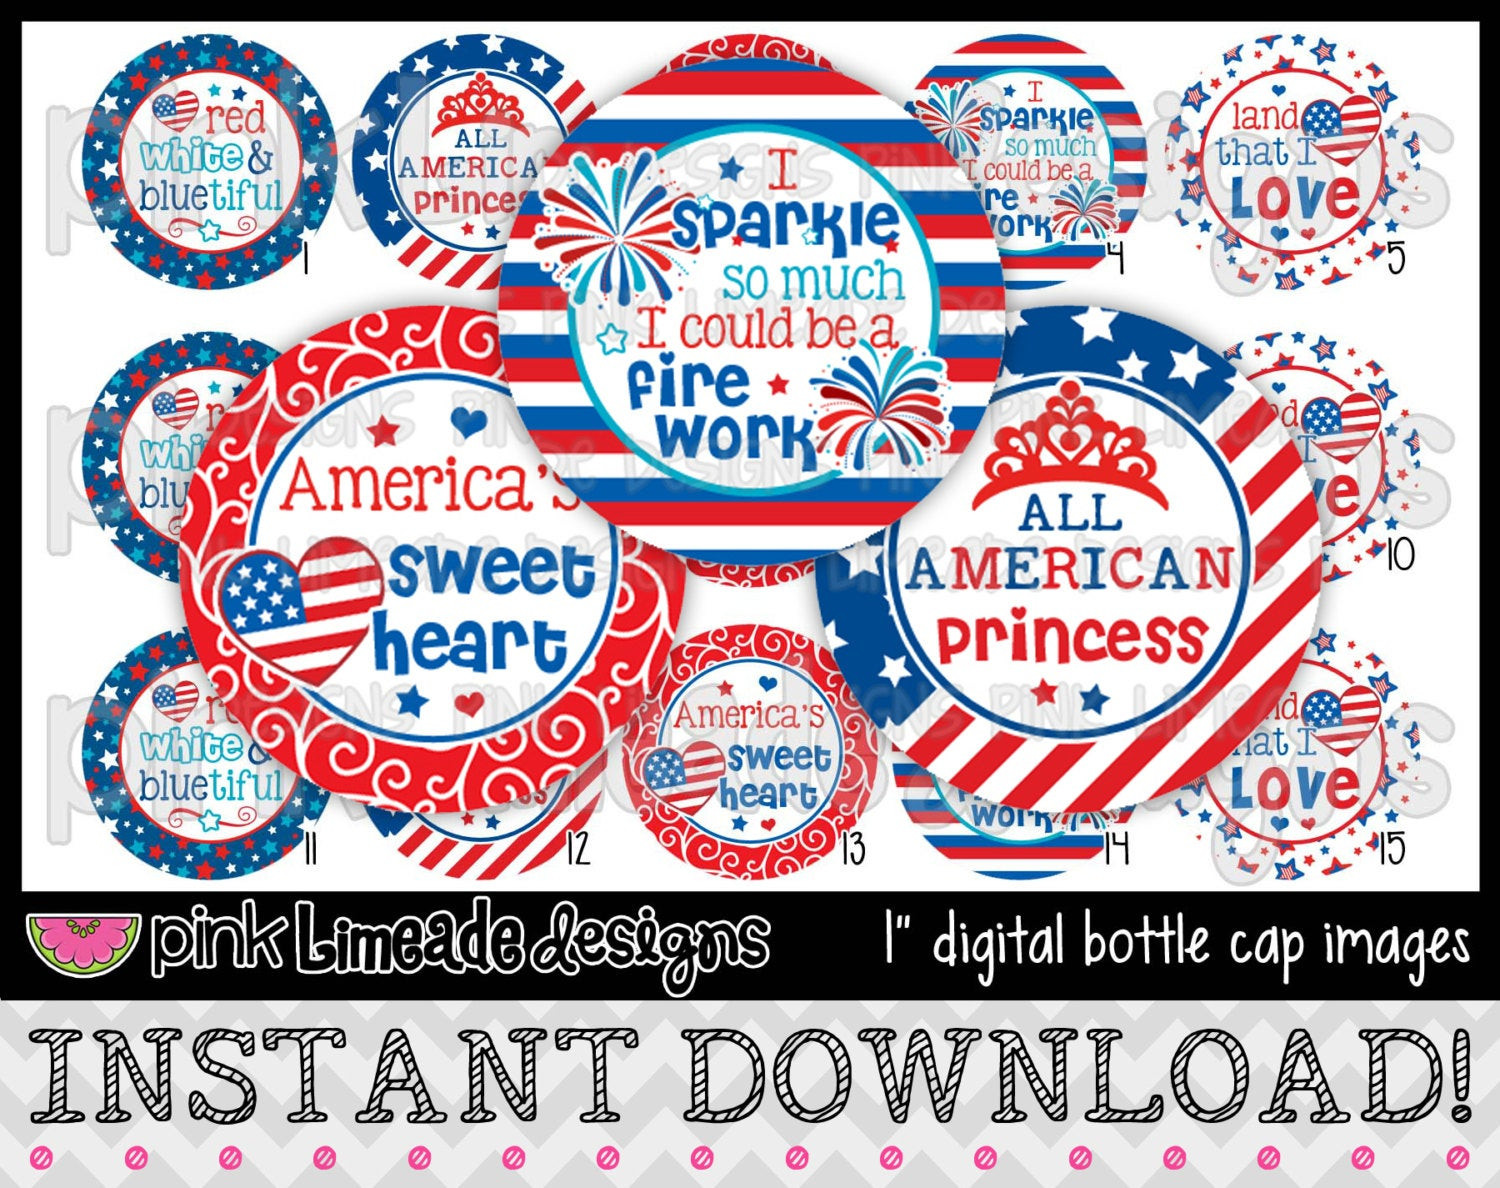 4th Of July Love Quotes
 Land That I Love cute 4th of July sayings INSTANT DOWNLOAD